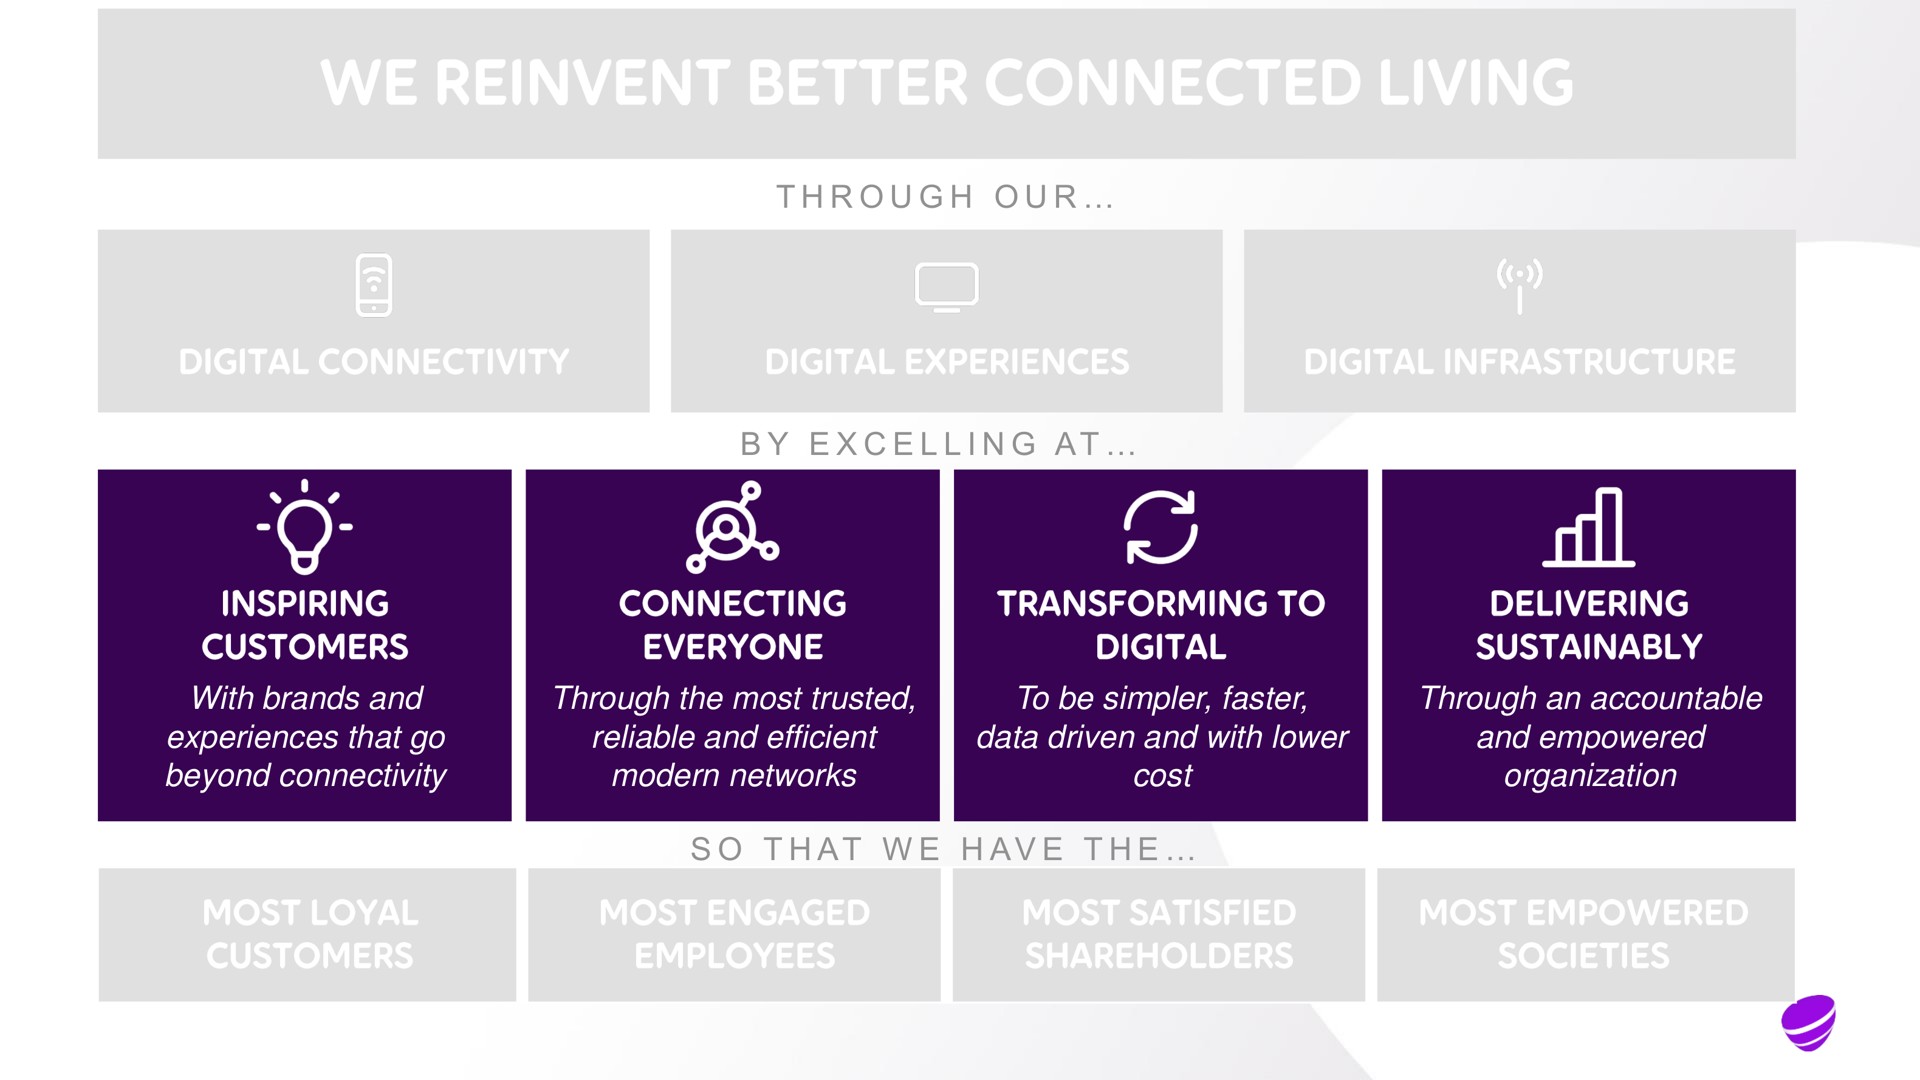 i a with brands and experiences that go beyond connectivity through the most trusted reliable and efficient modern networks to be simpler faster data driven and with lower cost through an accountable and empowered organization a a ill | Telia Company